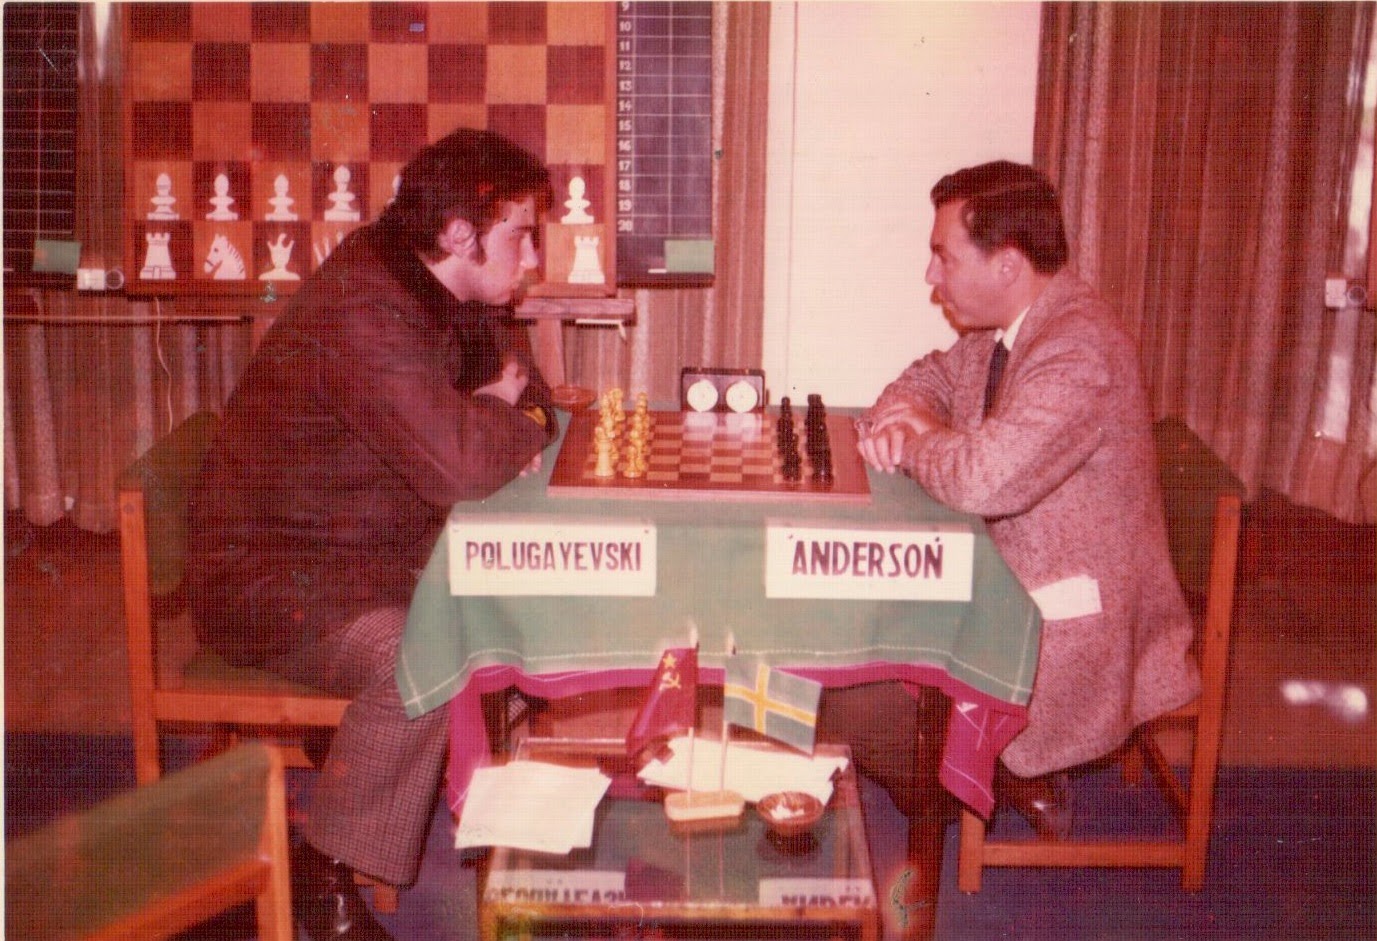 Your Host with GM Oscar Panno, in Palma de Mayorca 1972, where Panno was First with Korchnoi